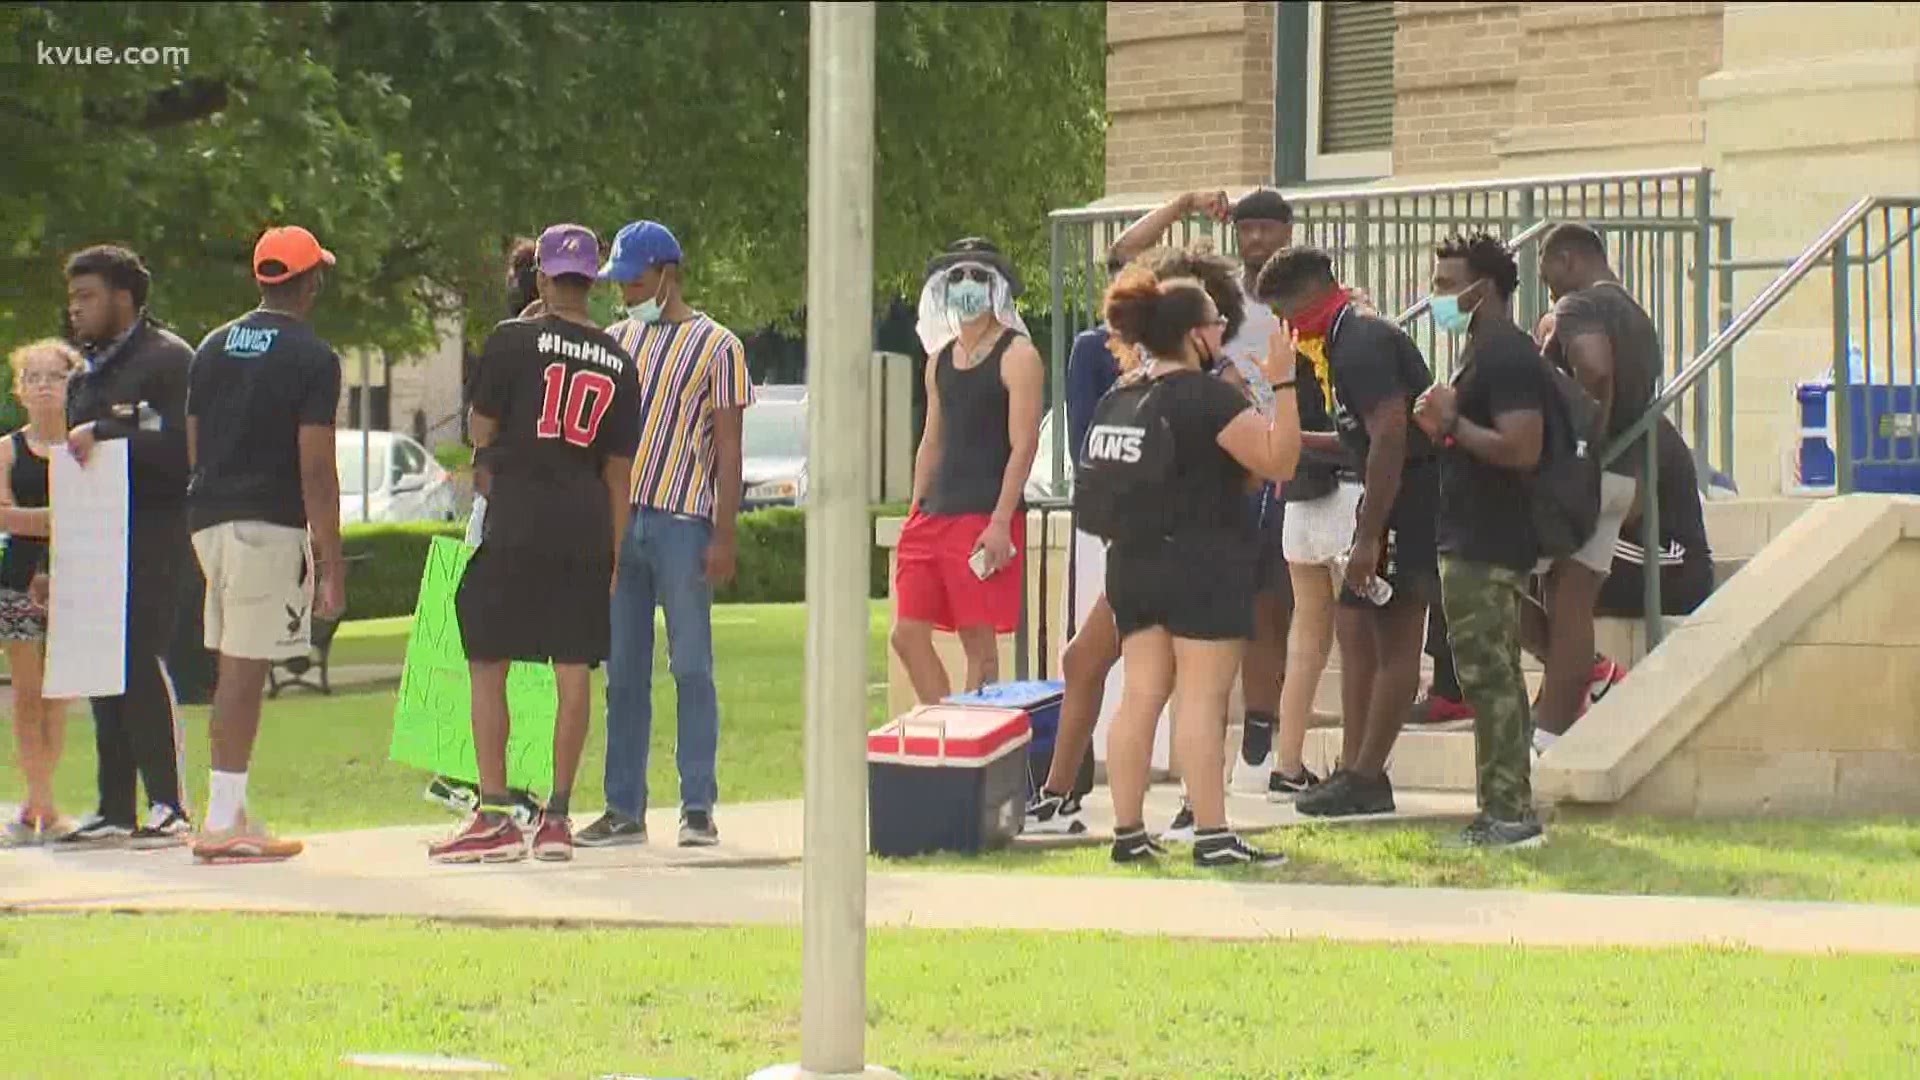 According to KVUE Reporter Bryce Newberry, the protest was organized by student leaders from Texas State University.